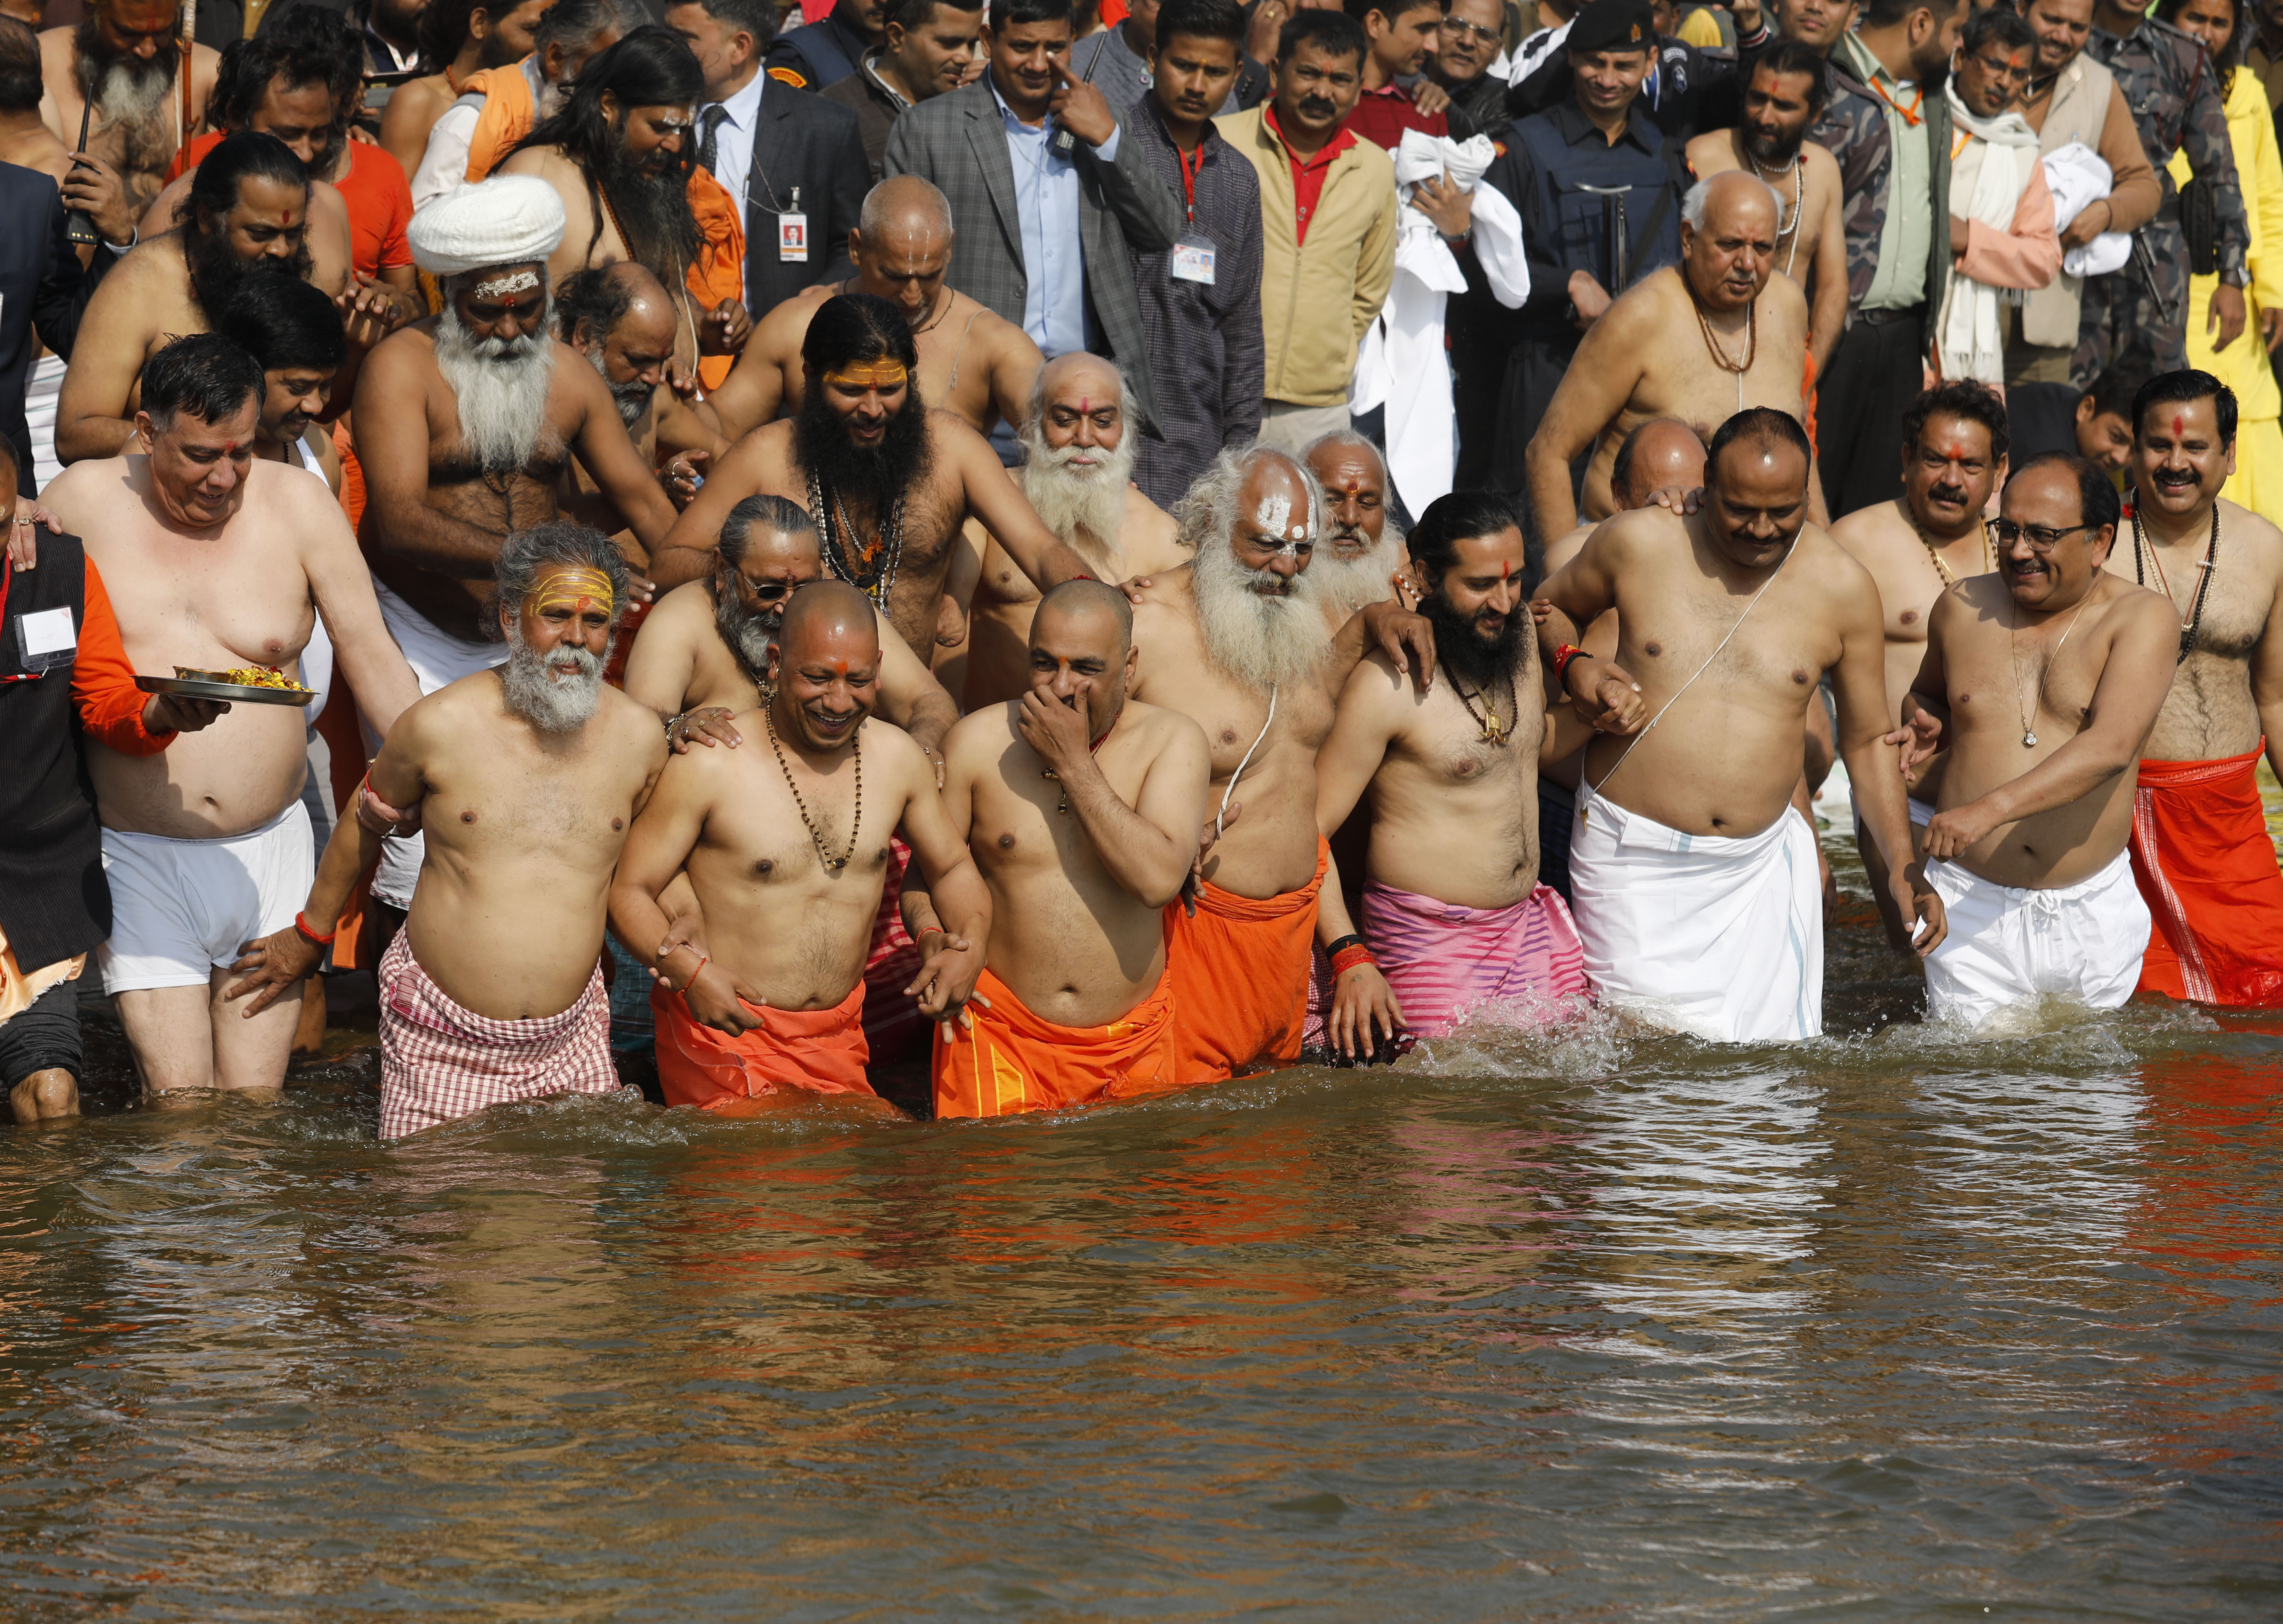 Chief Minister of Uttar Pradesh state Yogi Adityanath, front second left, takes a holy dip accompanied by saints and cabinet colleagues at the Sangam, the confluence of rivers Ganges and Yamuna, during the Kumbh Mela in Prayagraj - AP